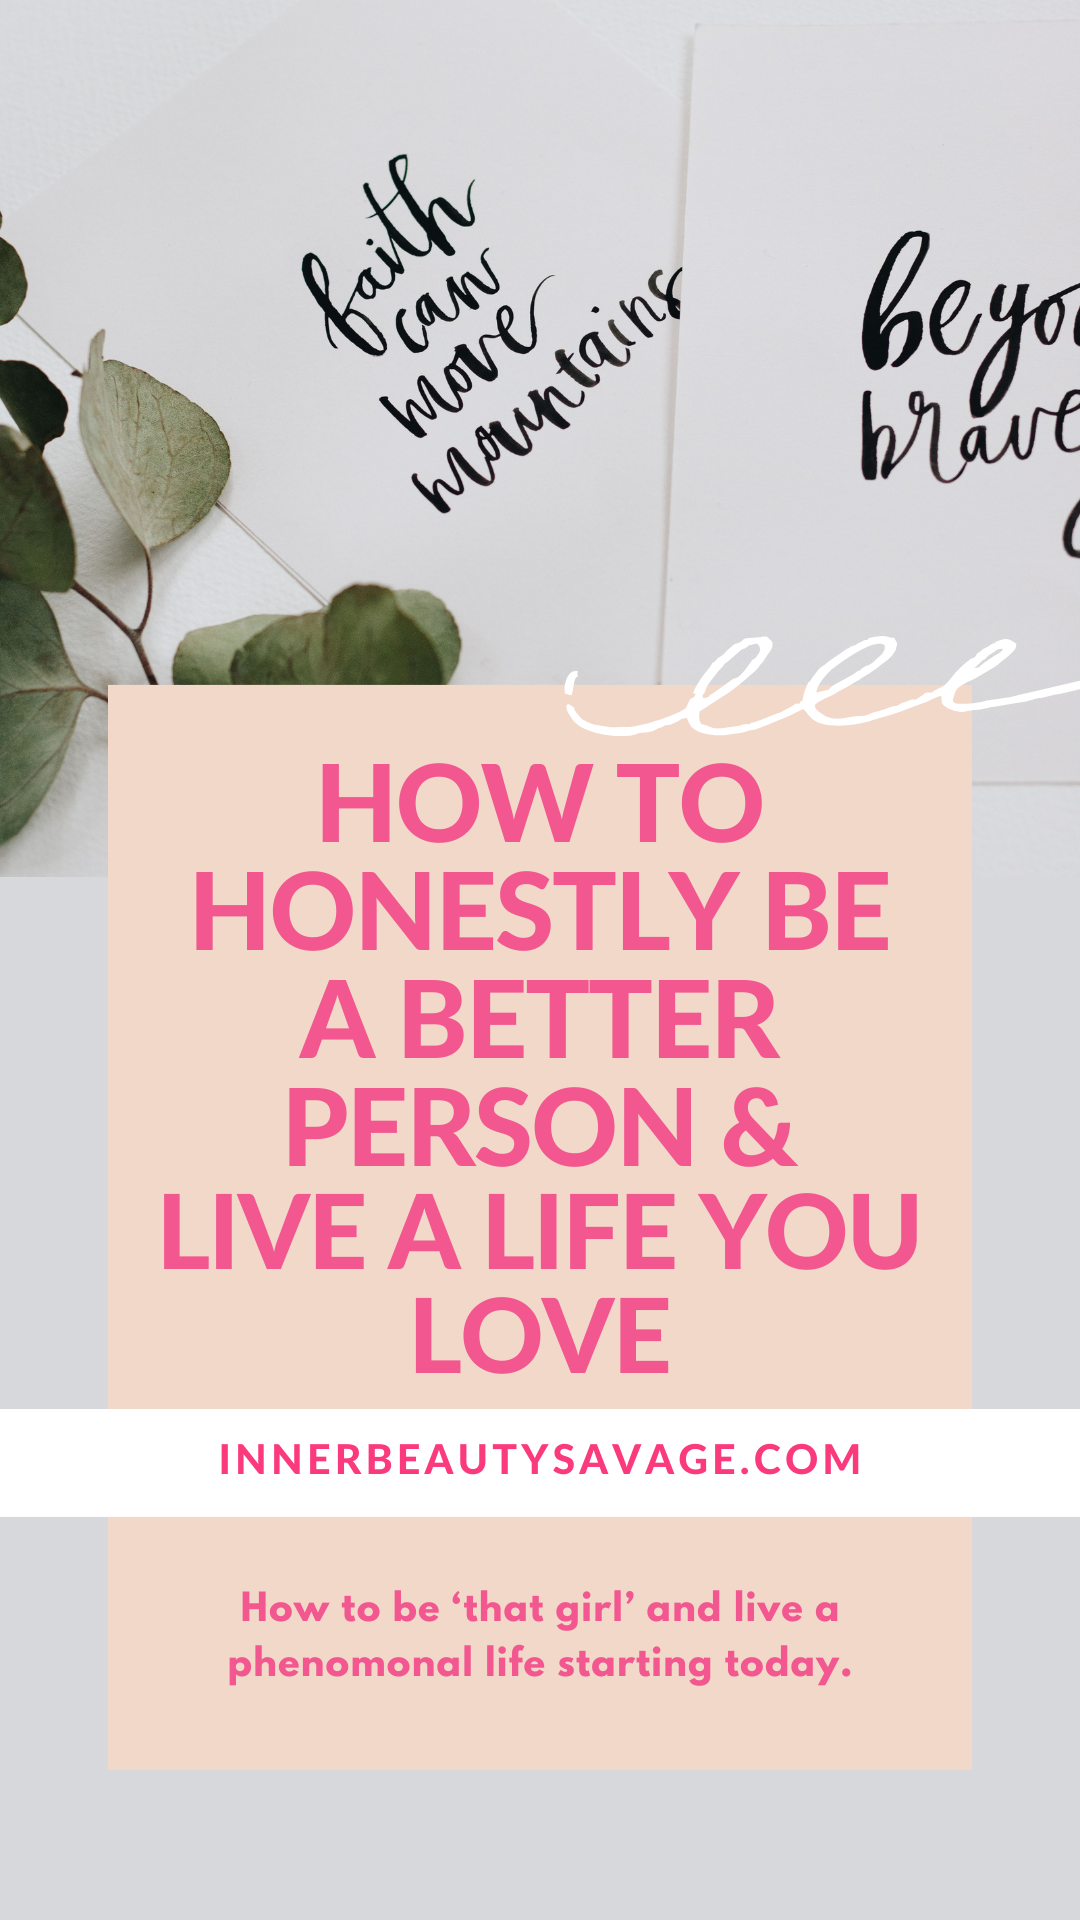 Pinterest pin on how to be a better person and live a life you love